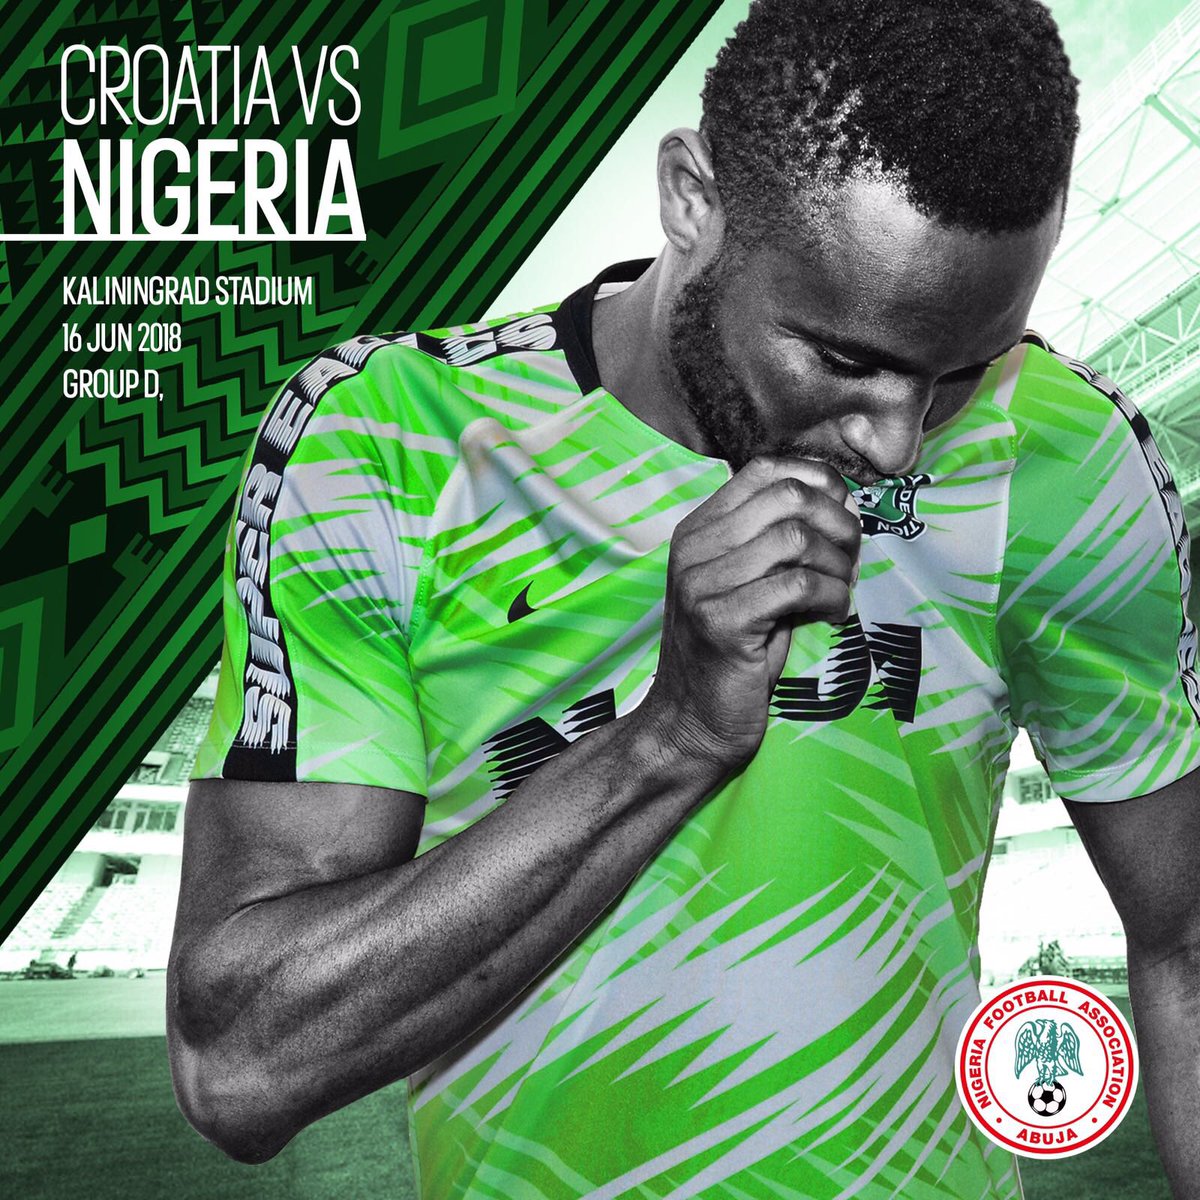 Today is the day. Let’s get this #WorldCup off to a strong start 💪🏾🇳🇬 #SoarSuperEagles. Thank you all for your support 👍🏾